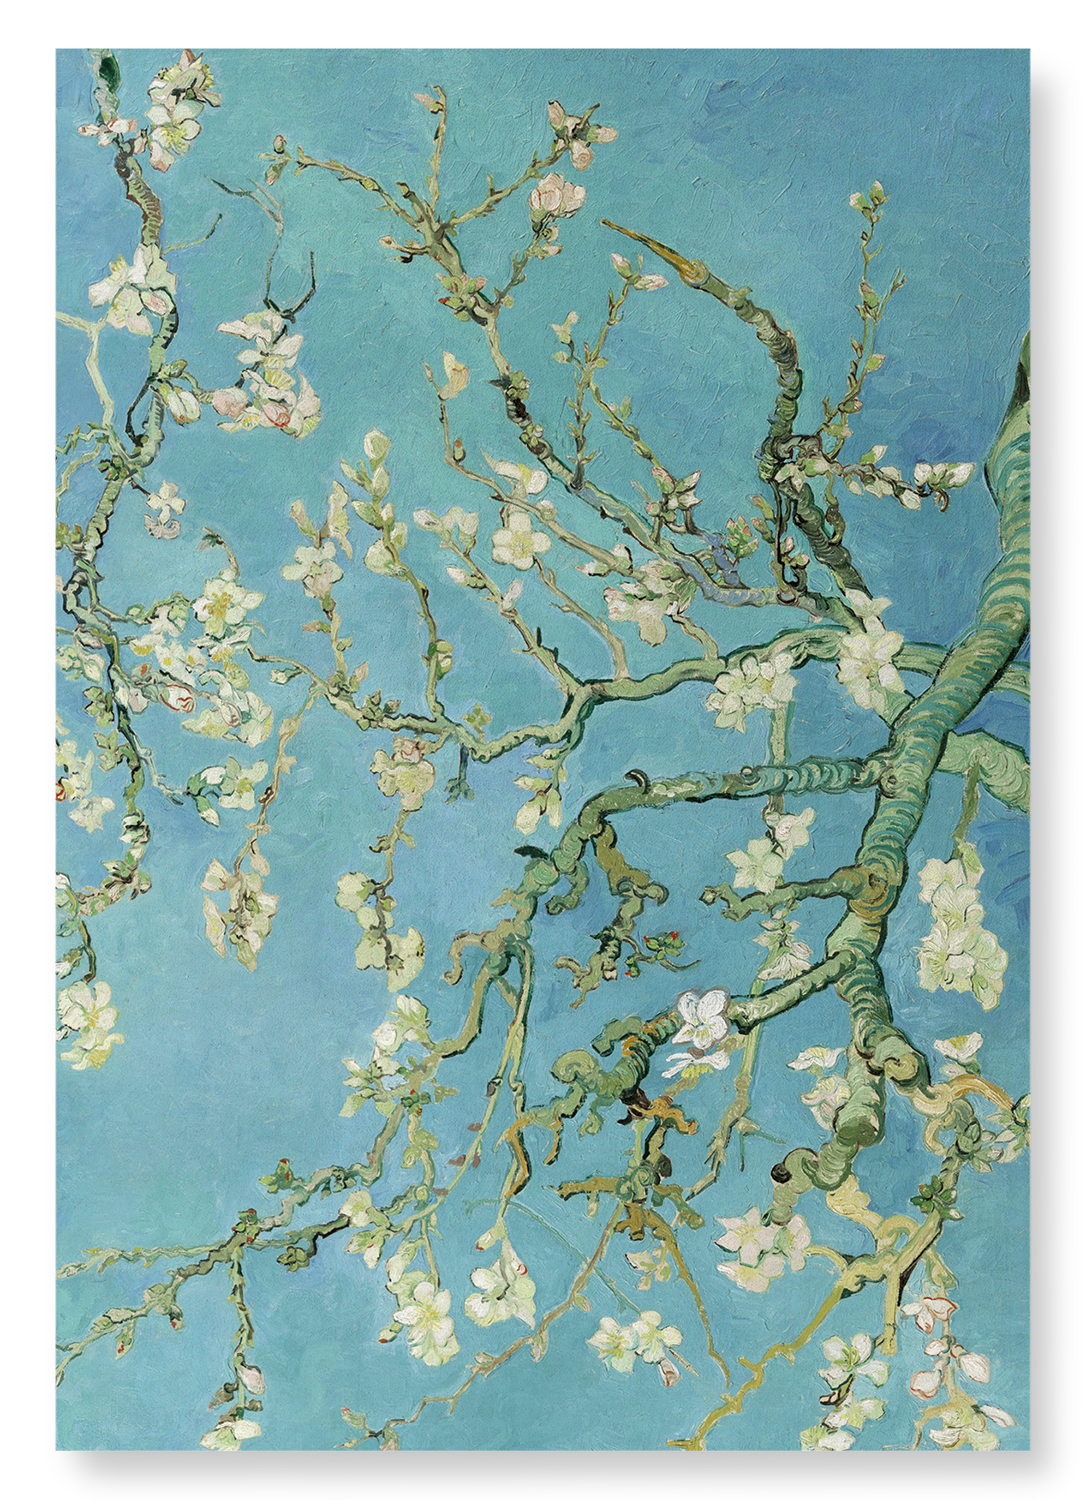 BLOSSOMING ALMOND TREE BY VAN GOGH